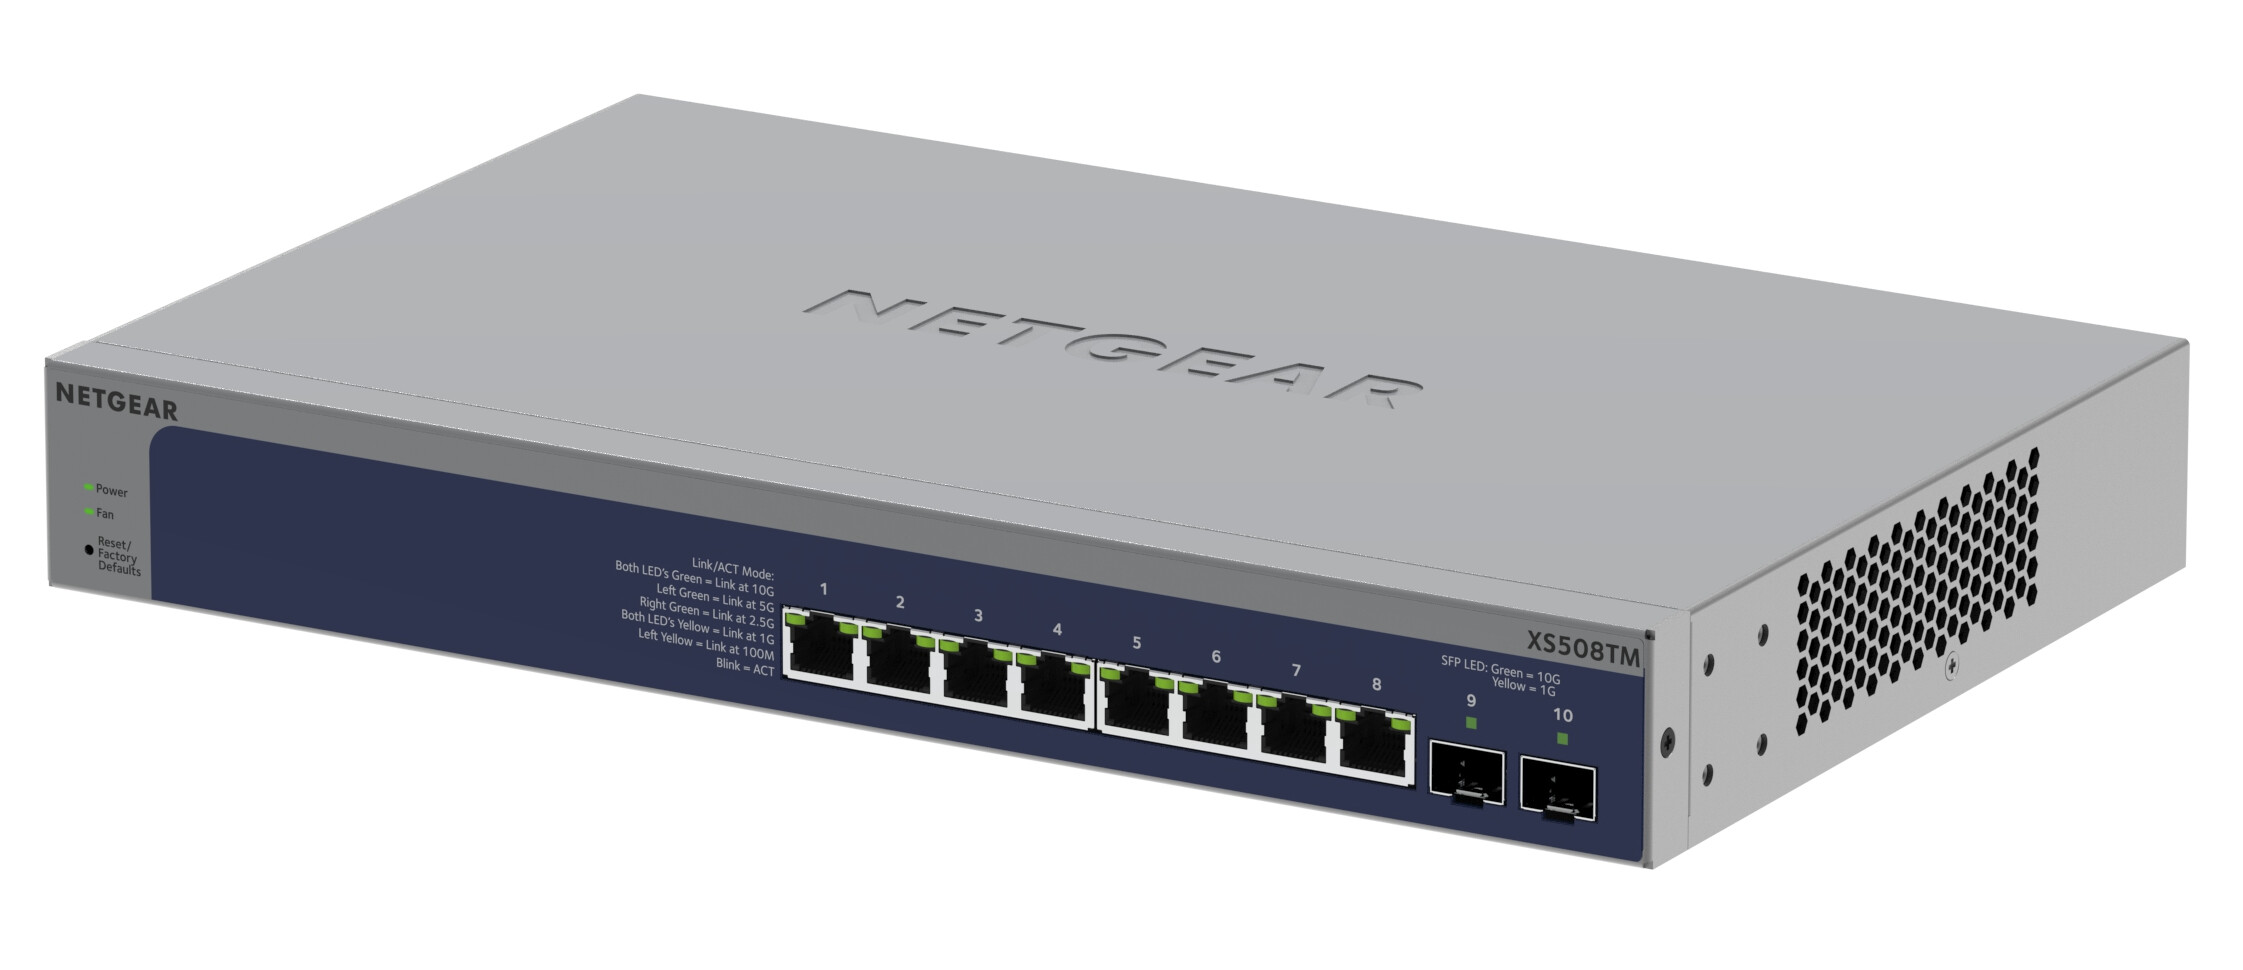 NETGEAR Introduces Top-of-the-line Cloud Manageable Smart Switch